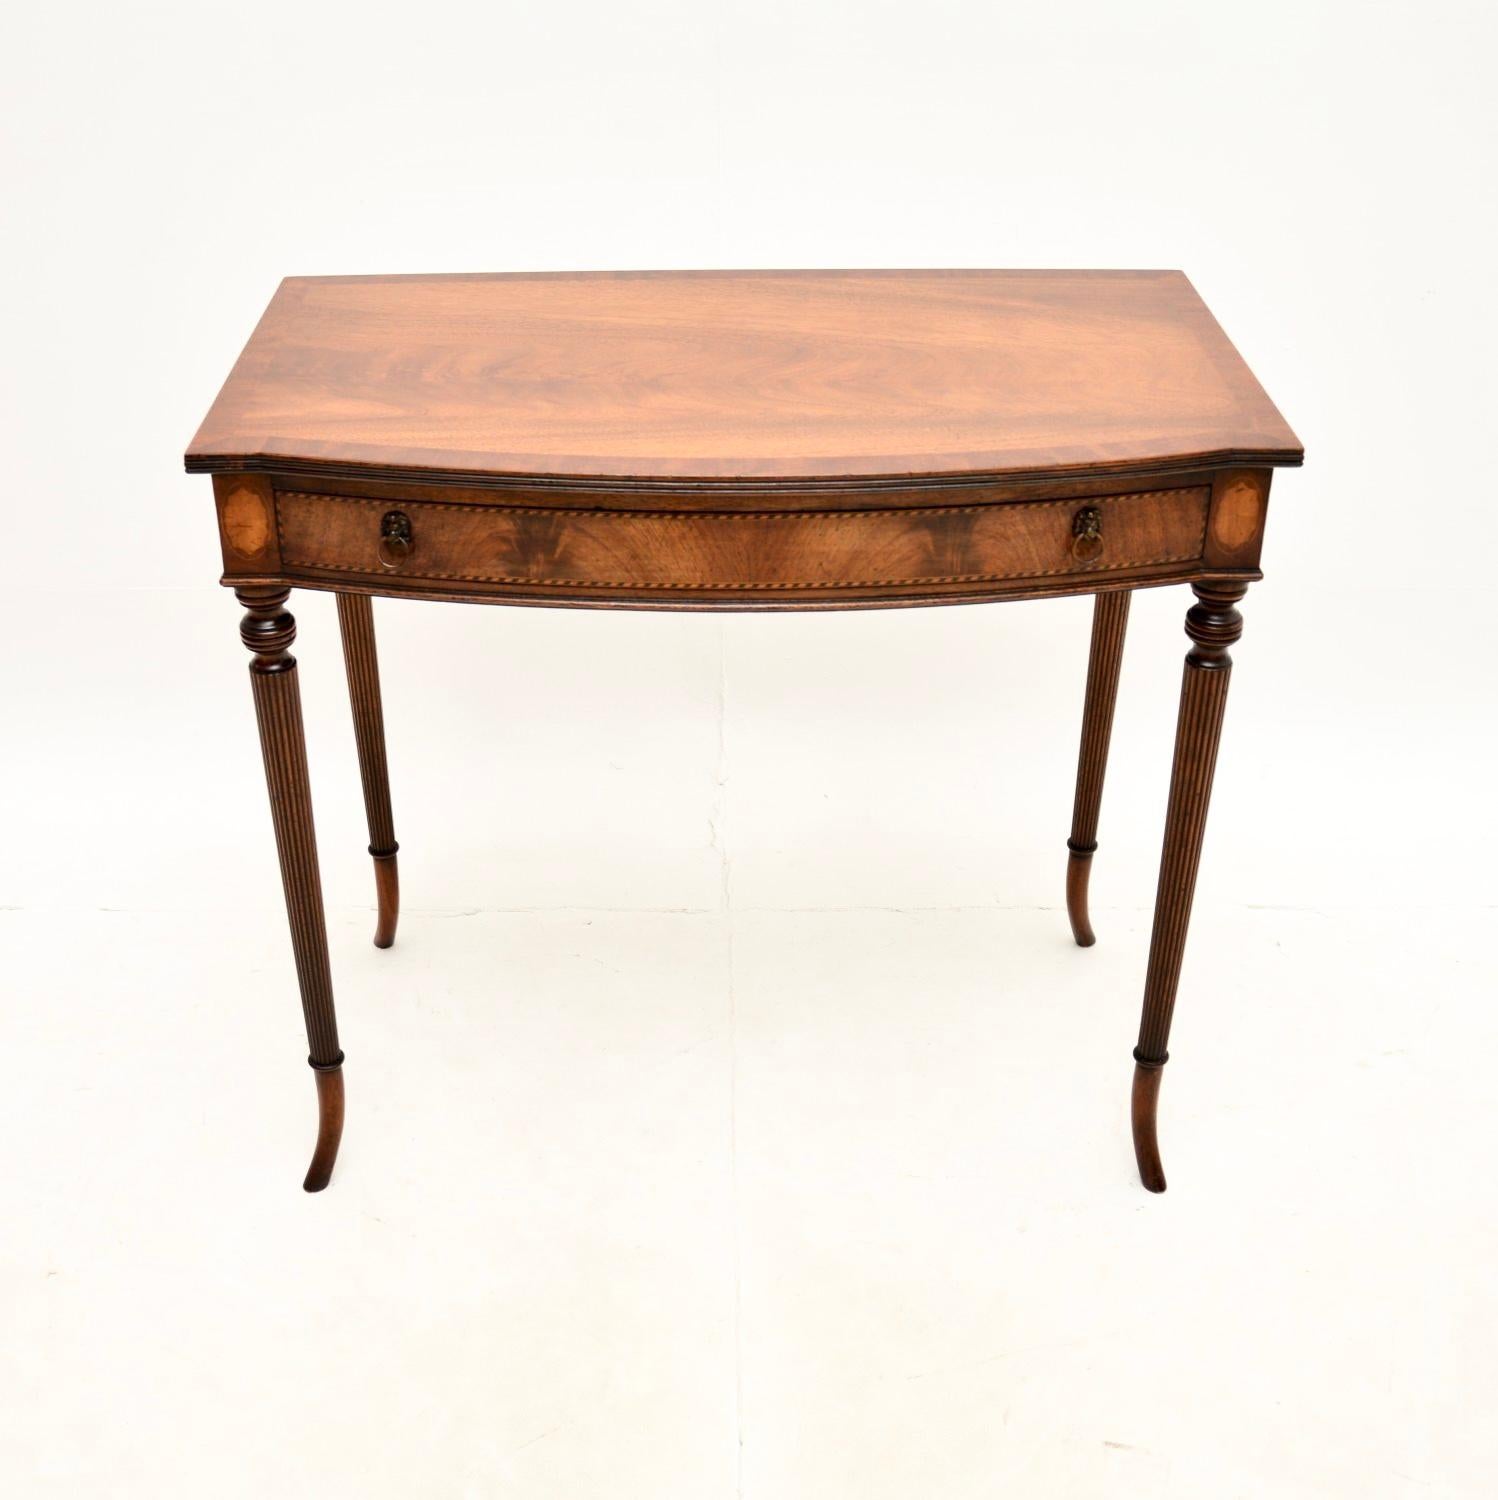 A beautiful and elegant antique writing / side table. This was made in England, it dates from around the 1920’s.

It is of extremely fine quality with a gorgeous and useful design. This is a great size to be used as a small desk or as a console side